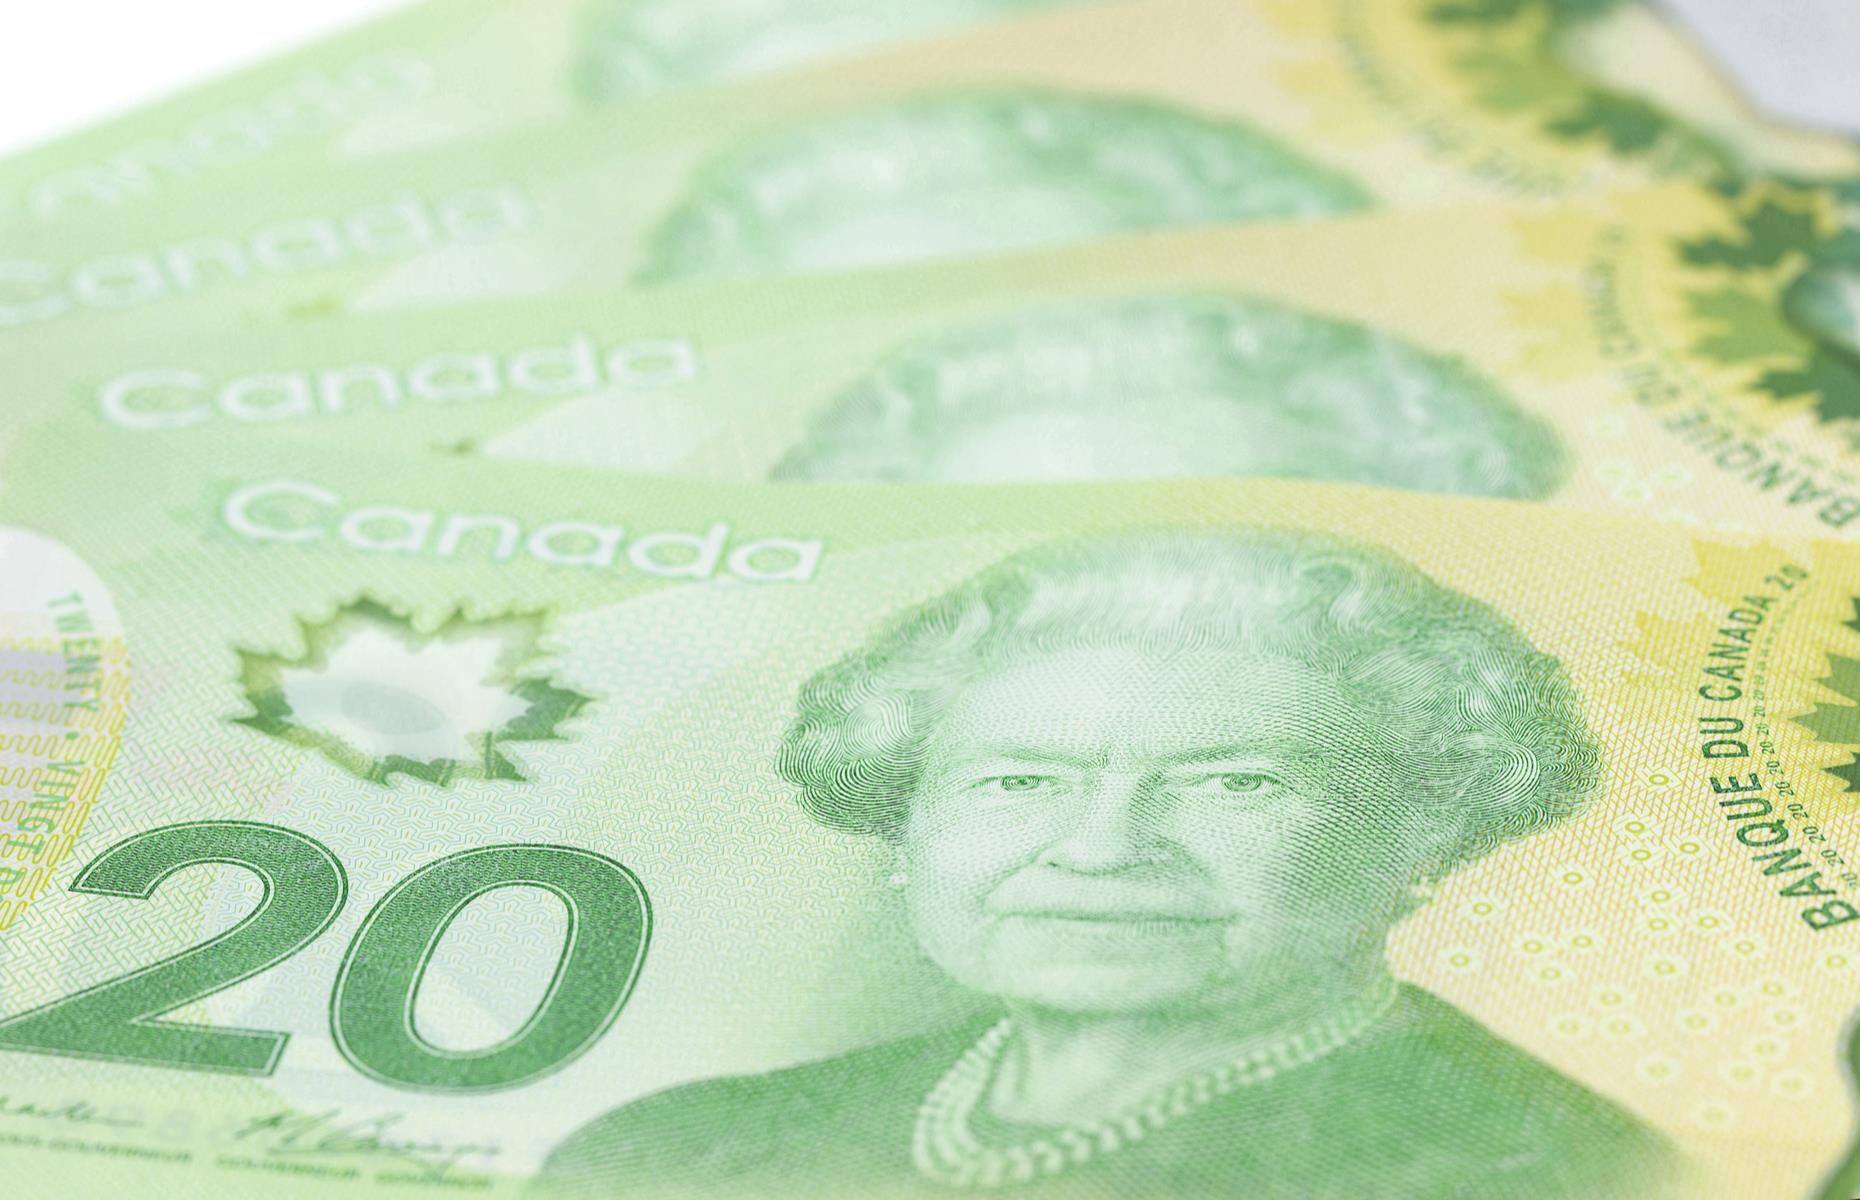 Canadian $20 note (2012)